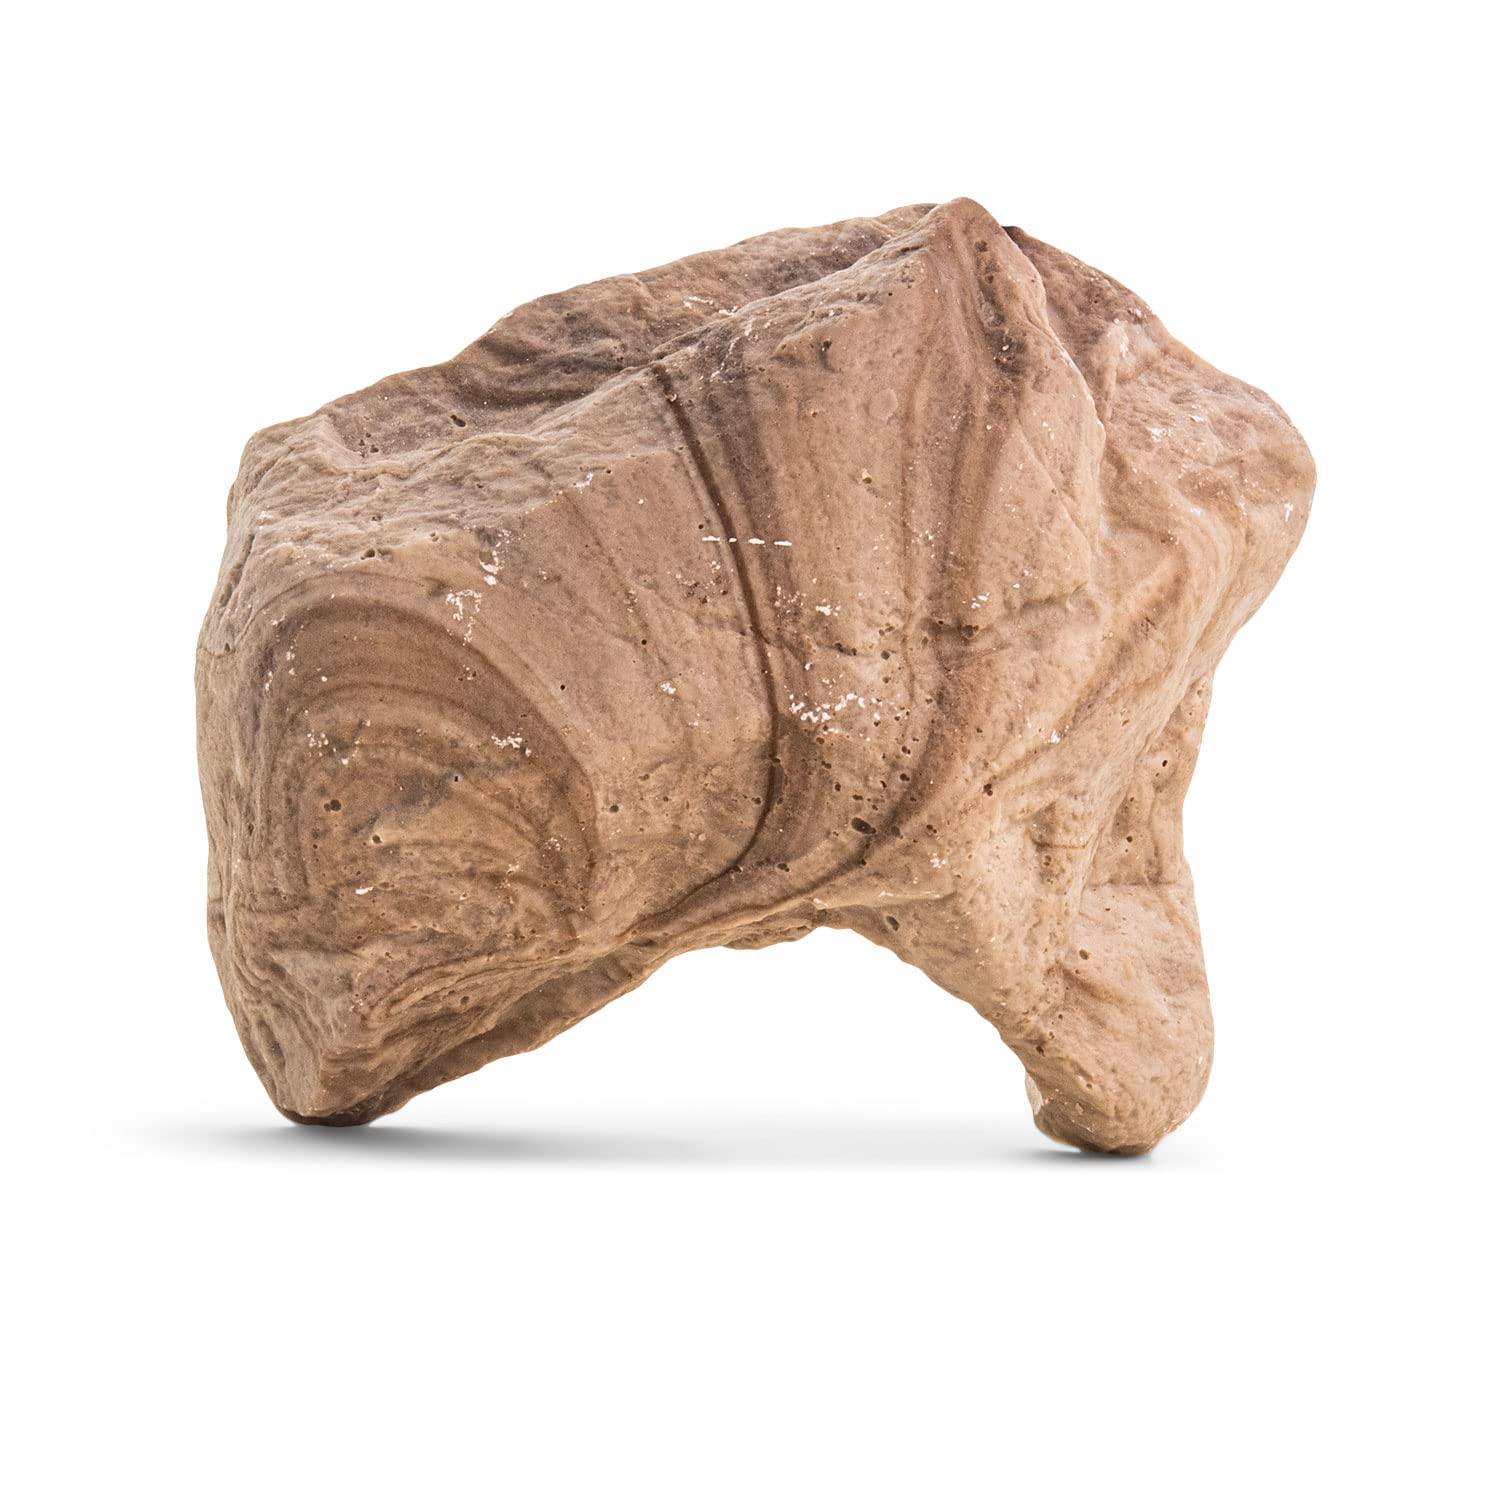 Fluker's Reptile Rock Cave - Natural Looking Rock Cave for all Reptiles, Amphibians and Arachnids, Large 9"